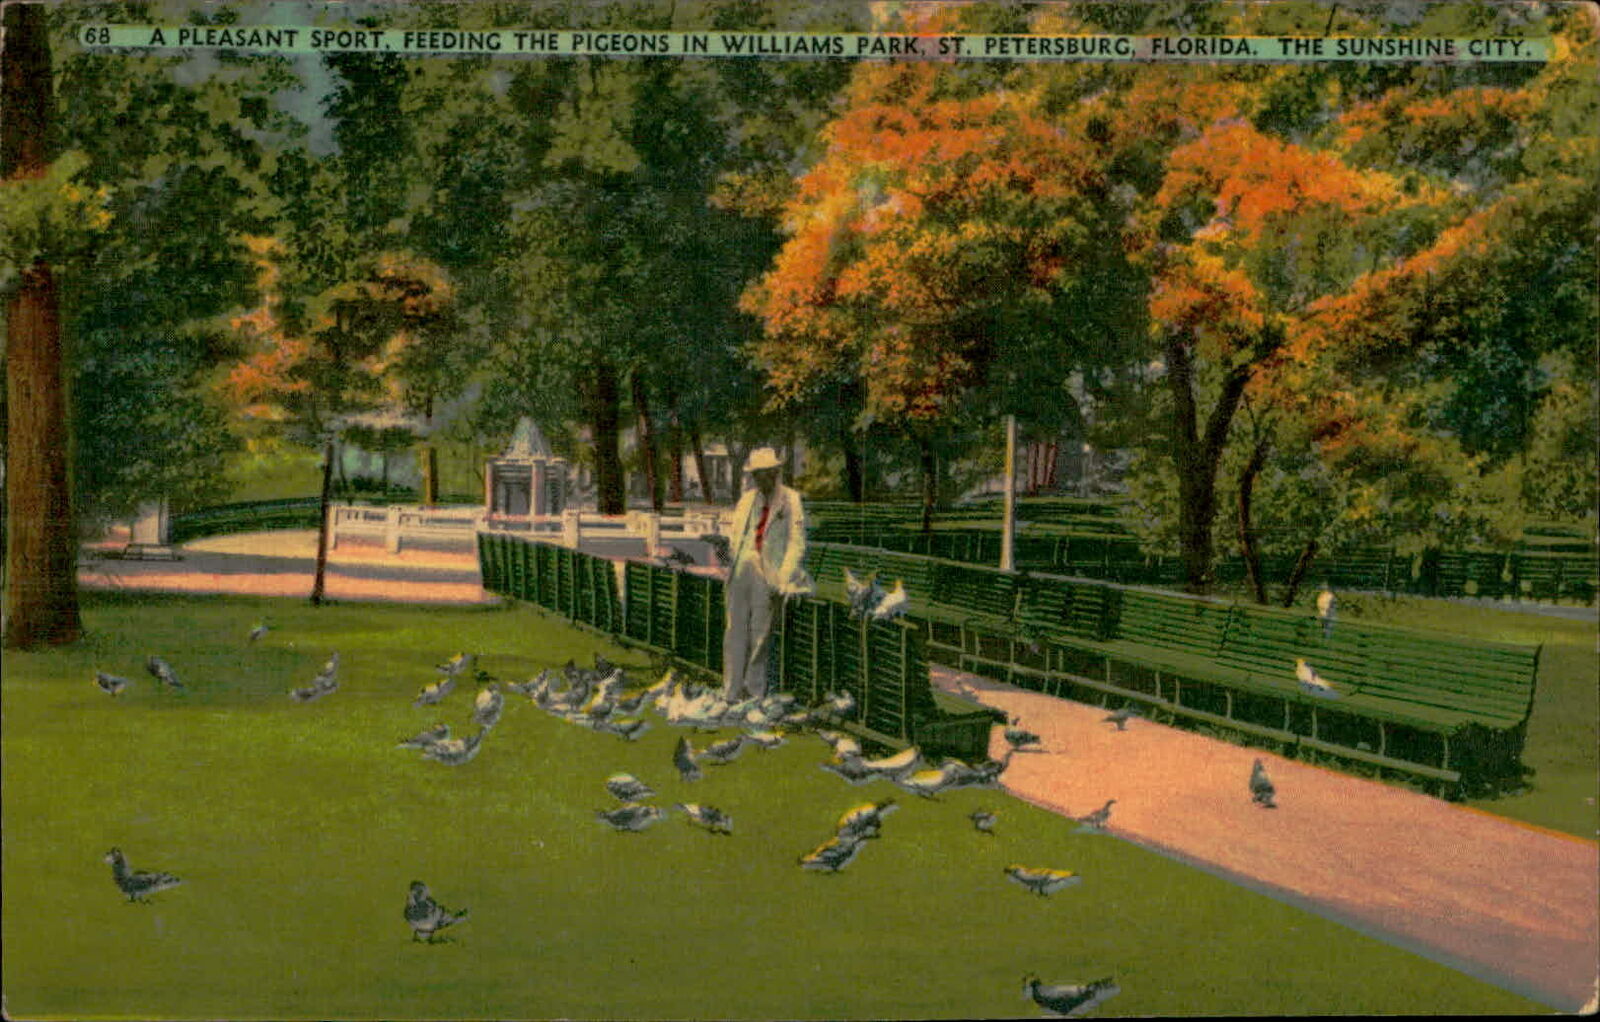 Postcard: 68 A PLEASANT SPORT. FEEDING THE PIGEONS IN WILLIAMS PARK, S